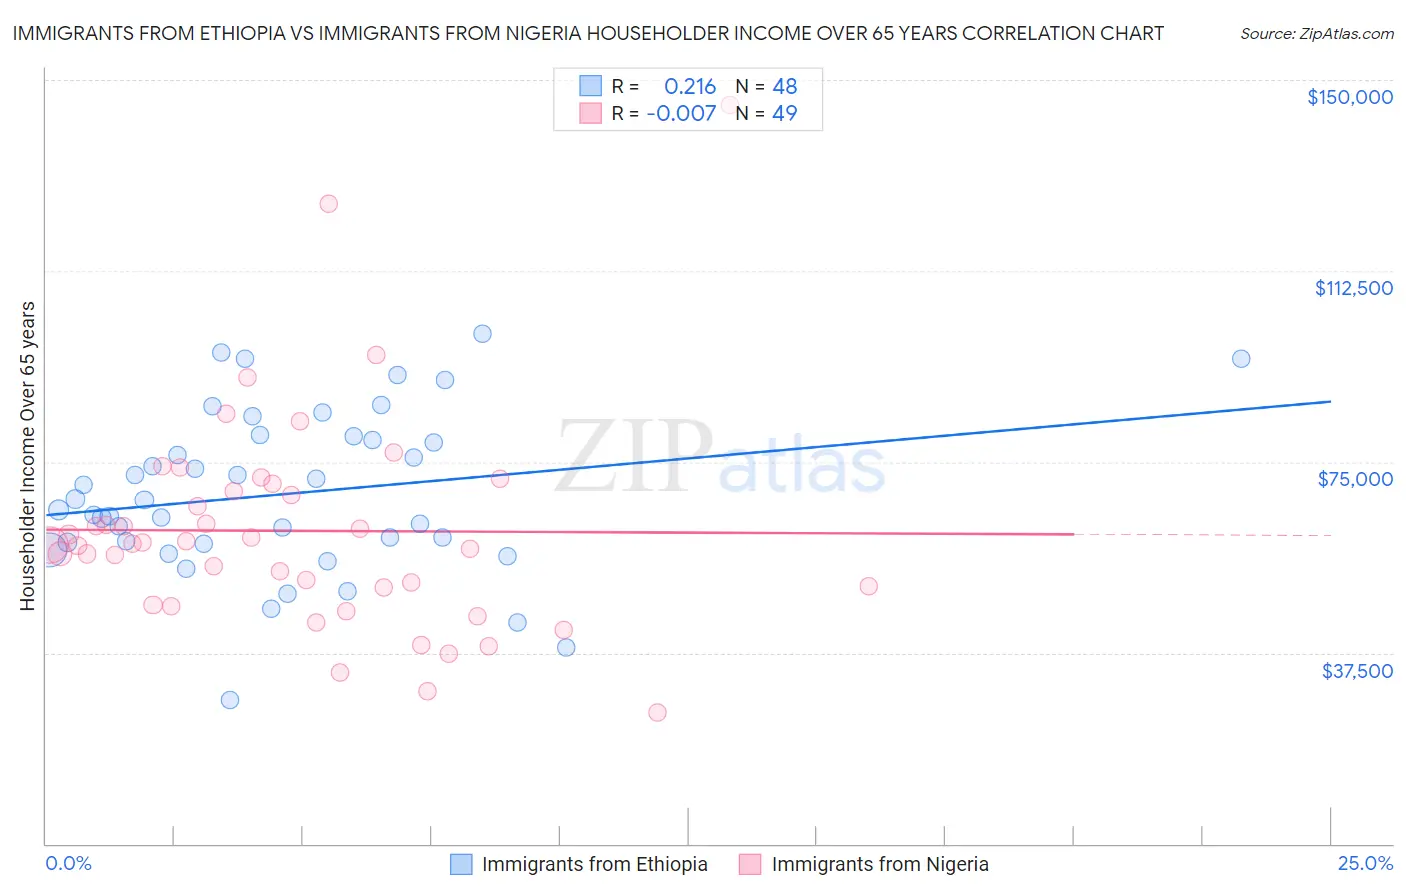 Immigrants from Ethiopia vs Immigrants from Nigeria Householder Income Over 65 years